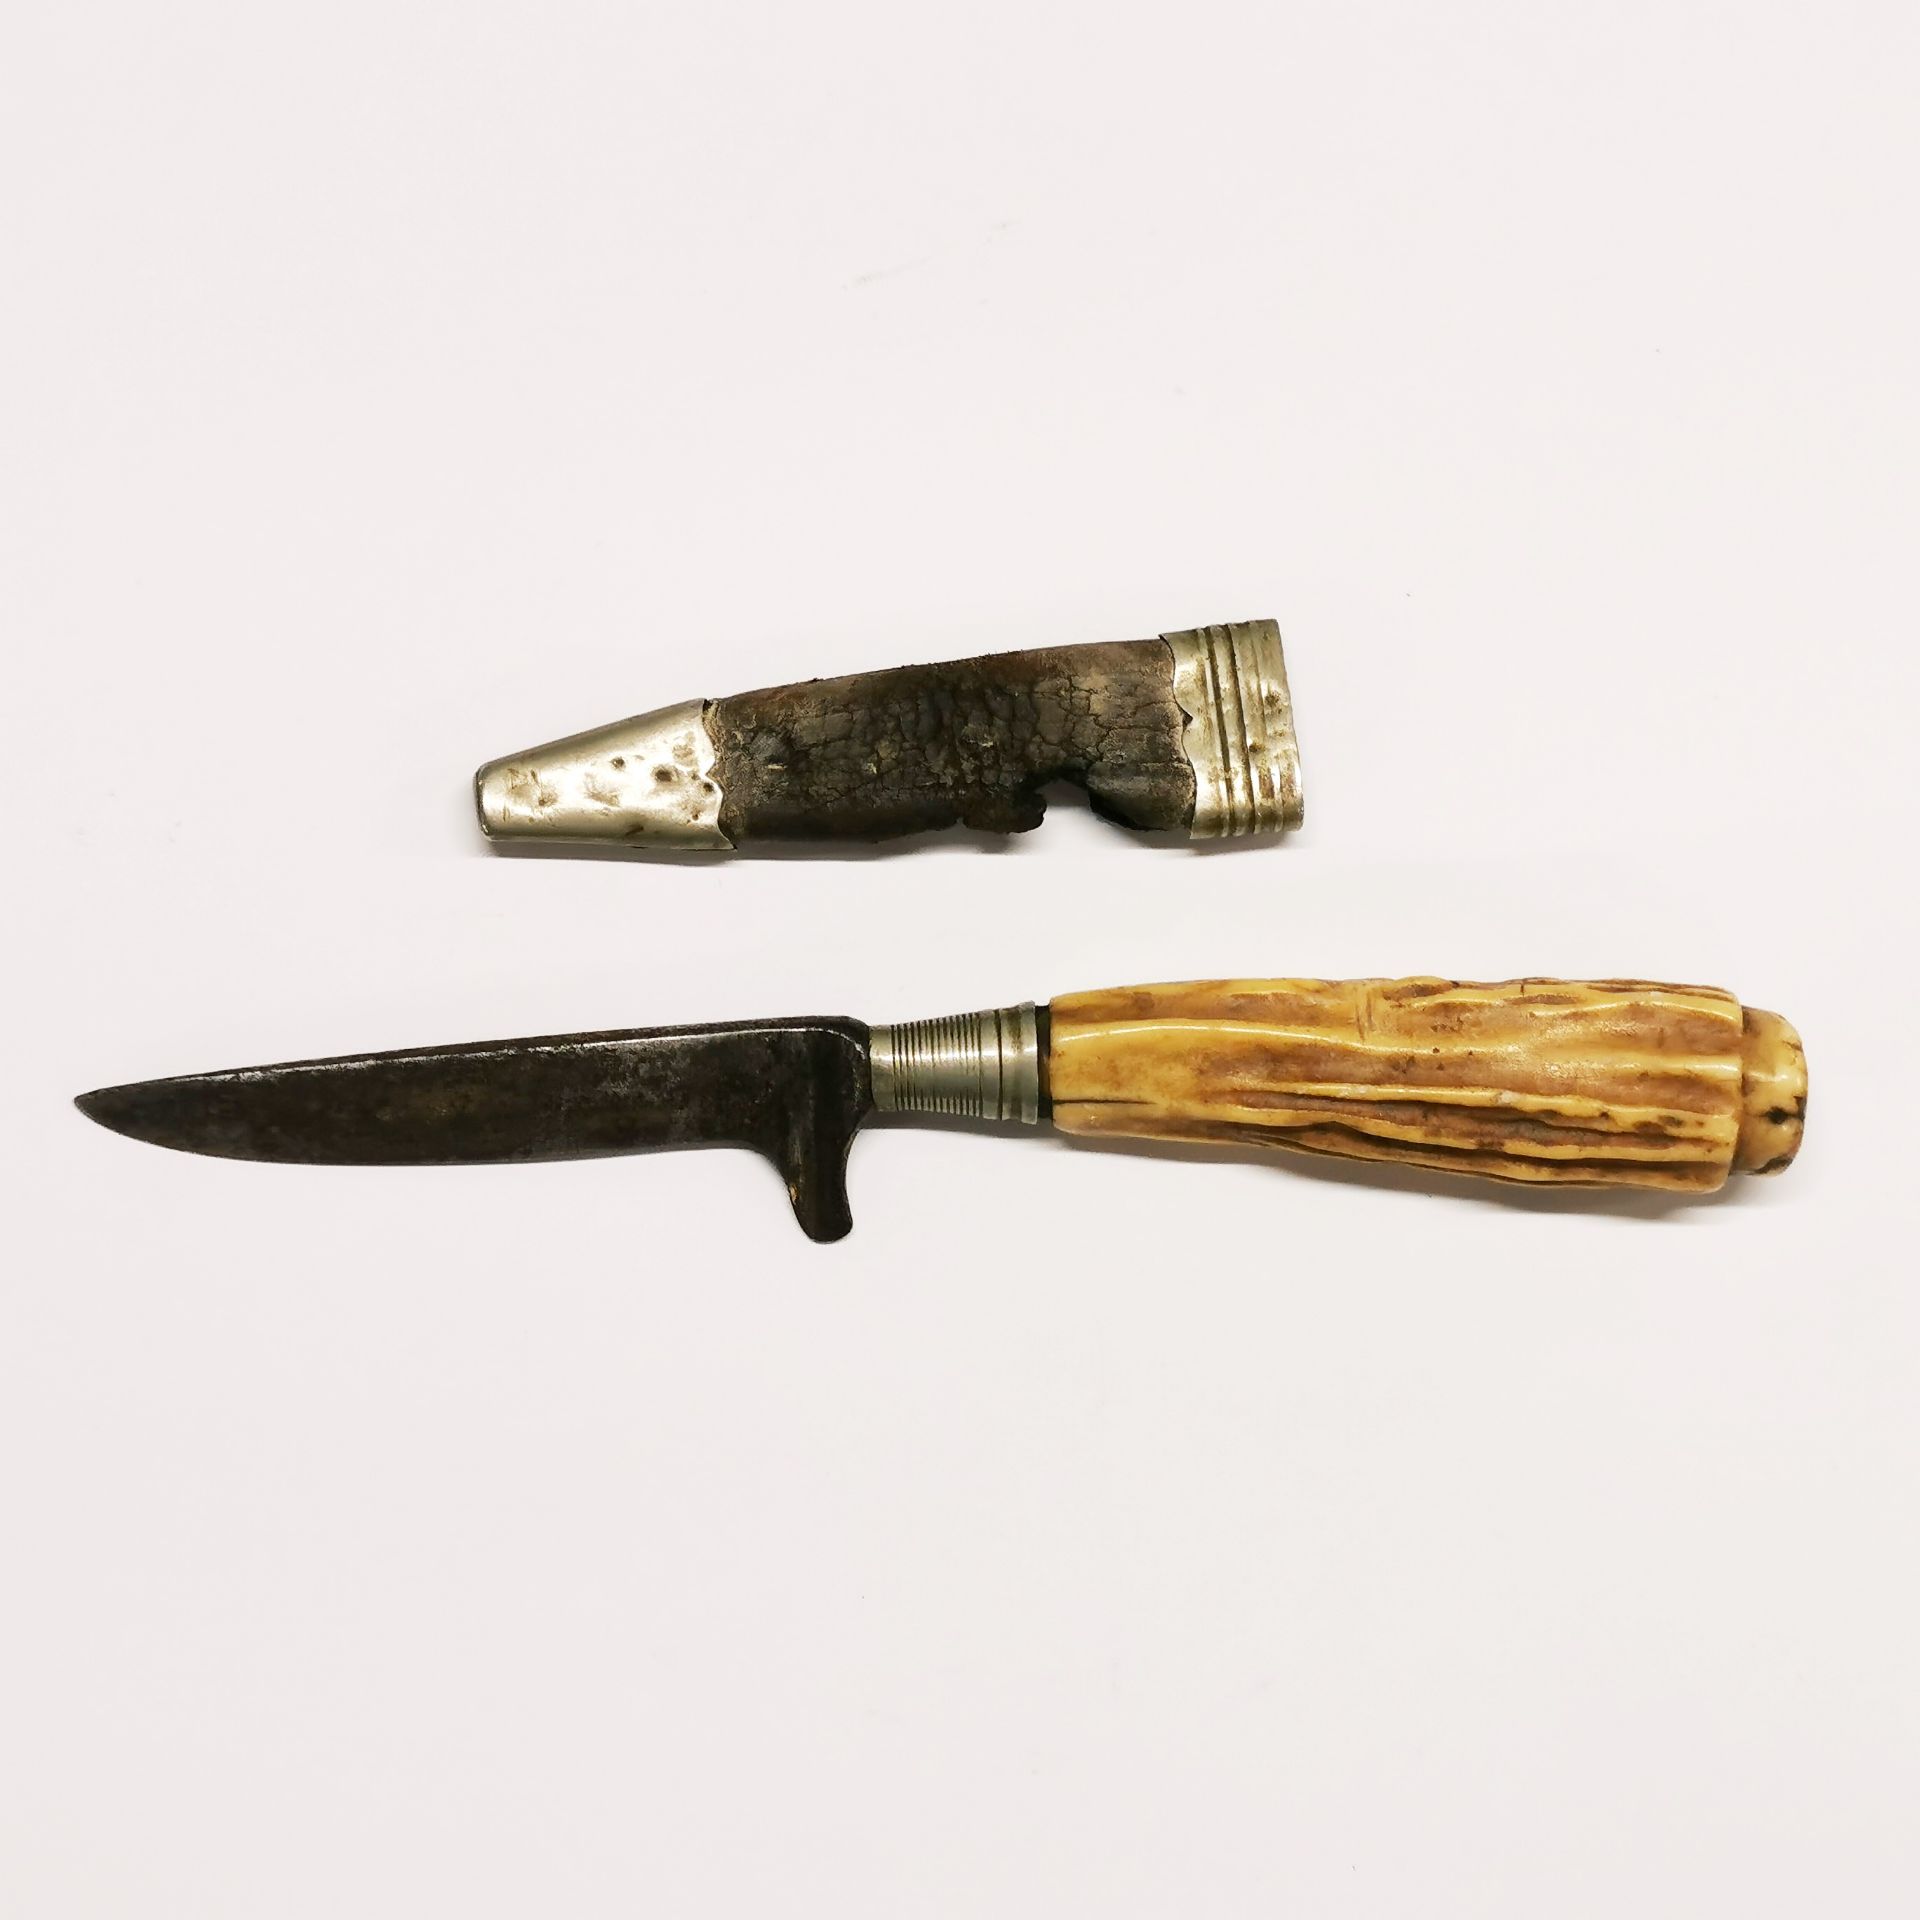 A Scottish antler handled dirk knife with a white metal and leather sheath (A/F)